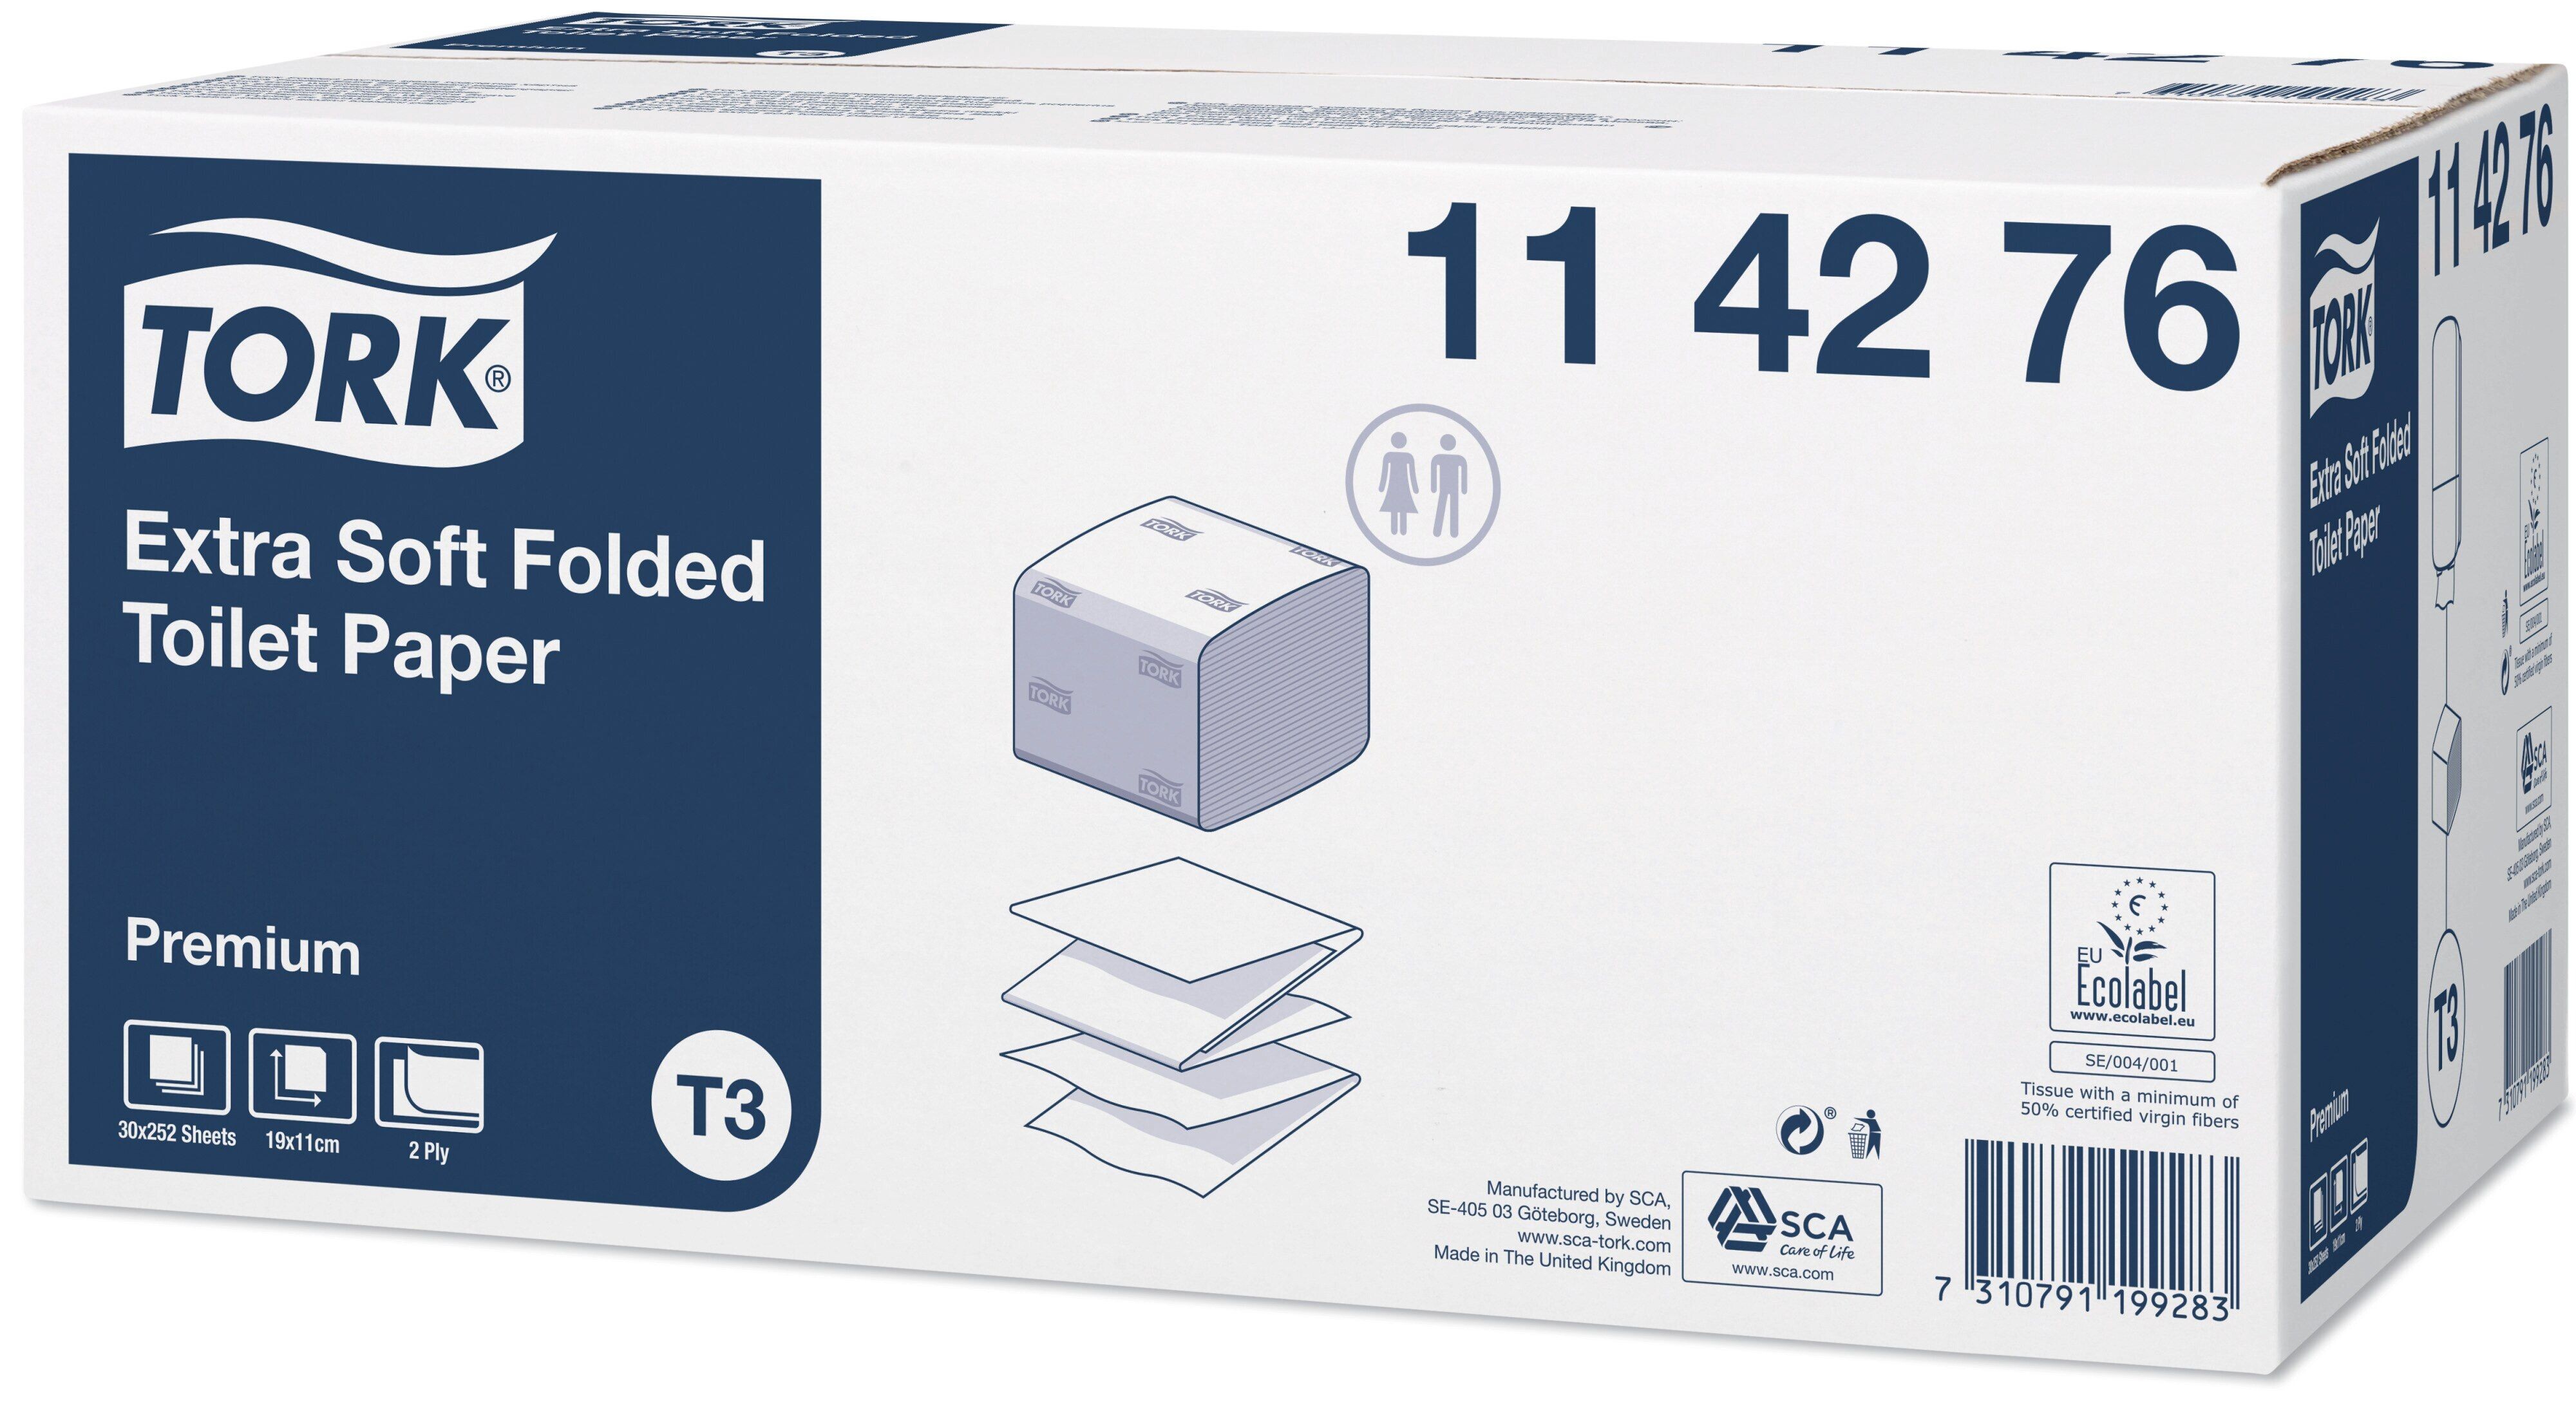 TORK Extra Soft Folded Toilet Paper 2ply 30x252 sheets 114276